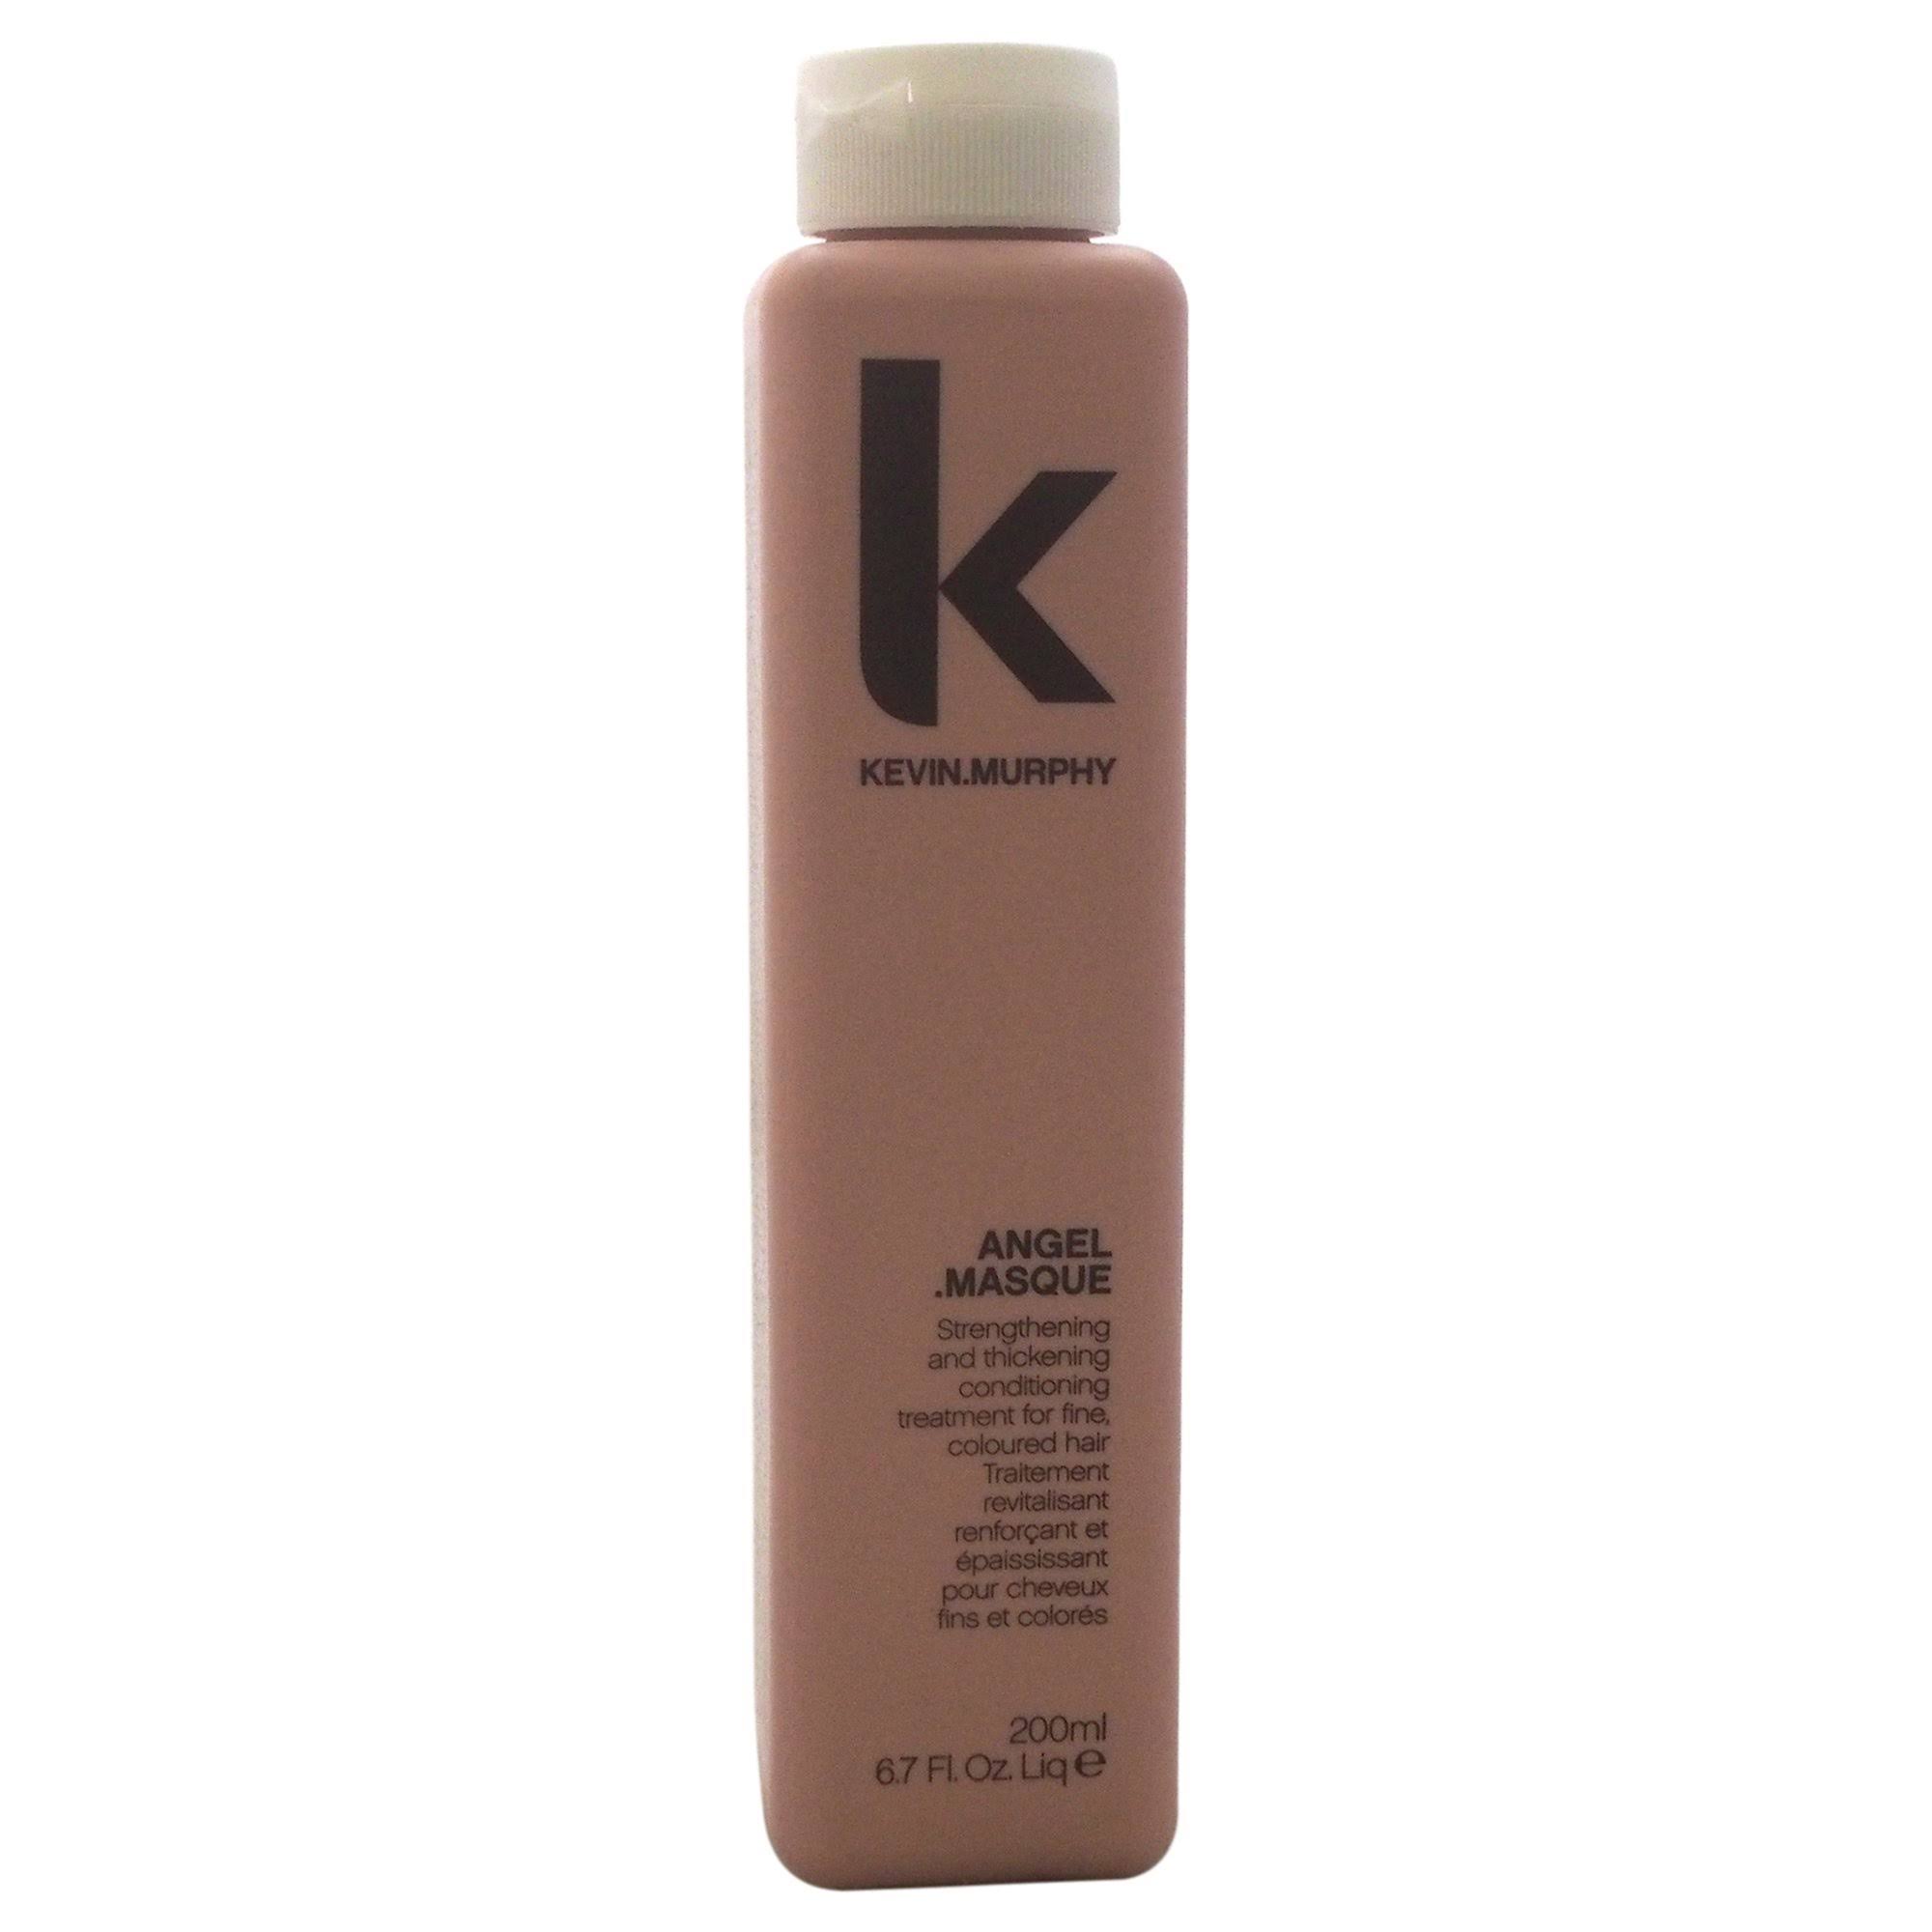 Kevin Murphy Angel Masque Strengthening & Thickening Conditioner - 200ml